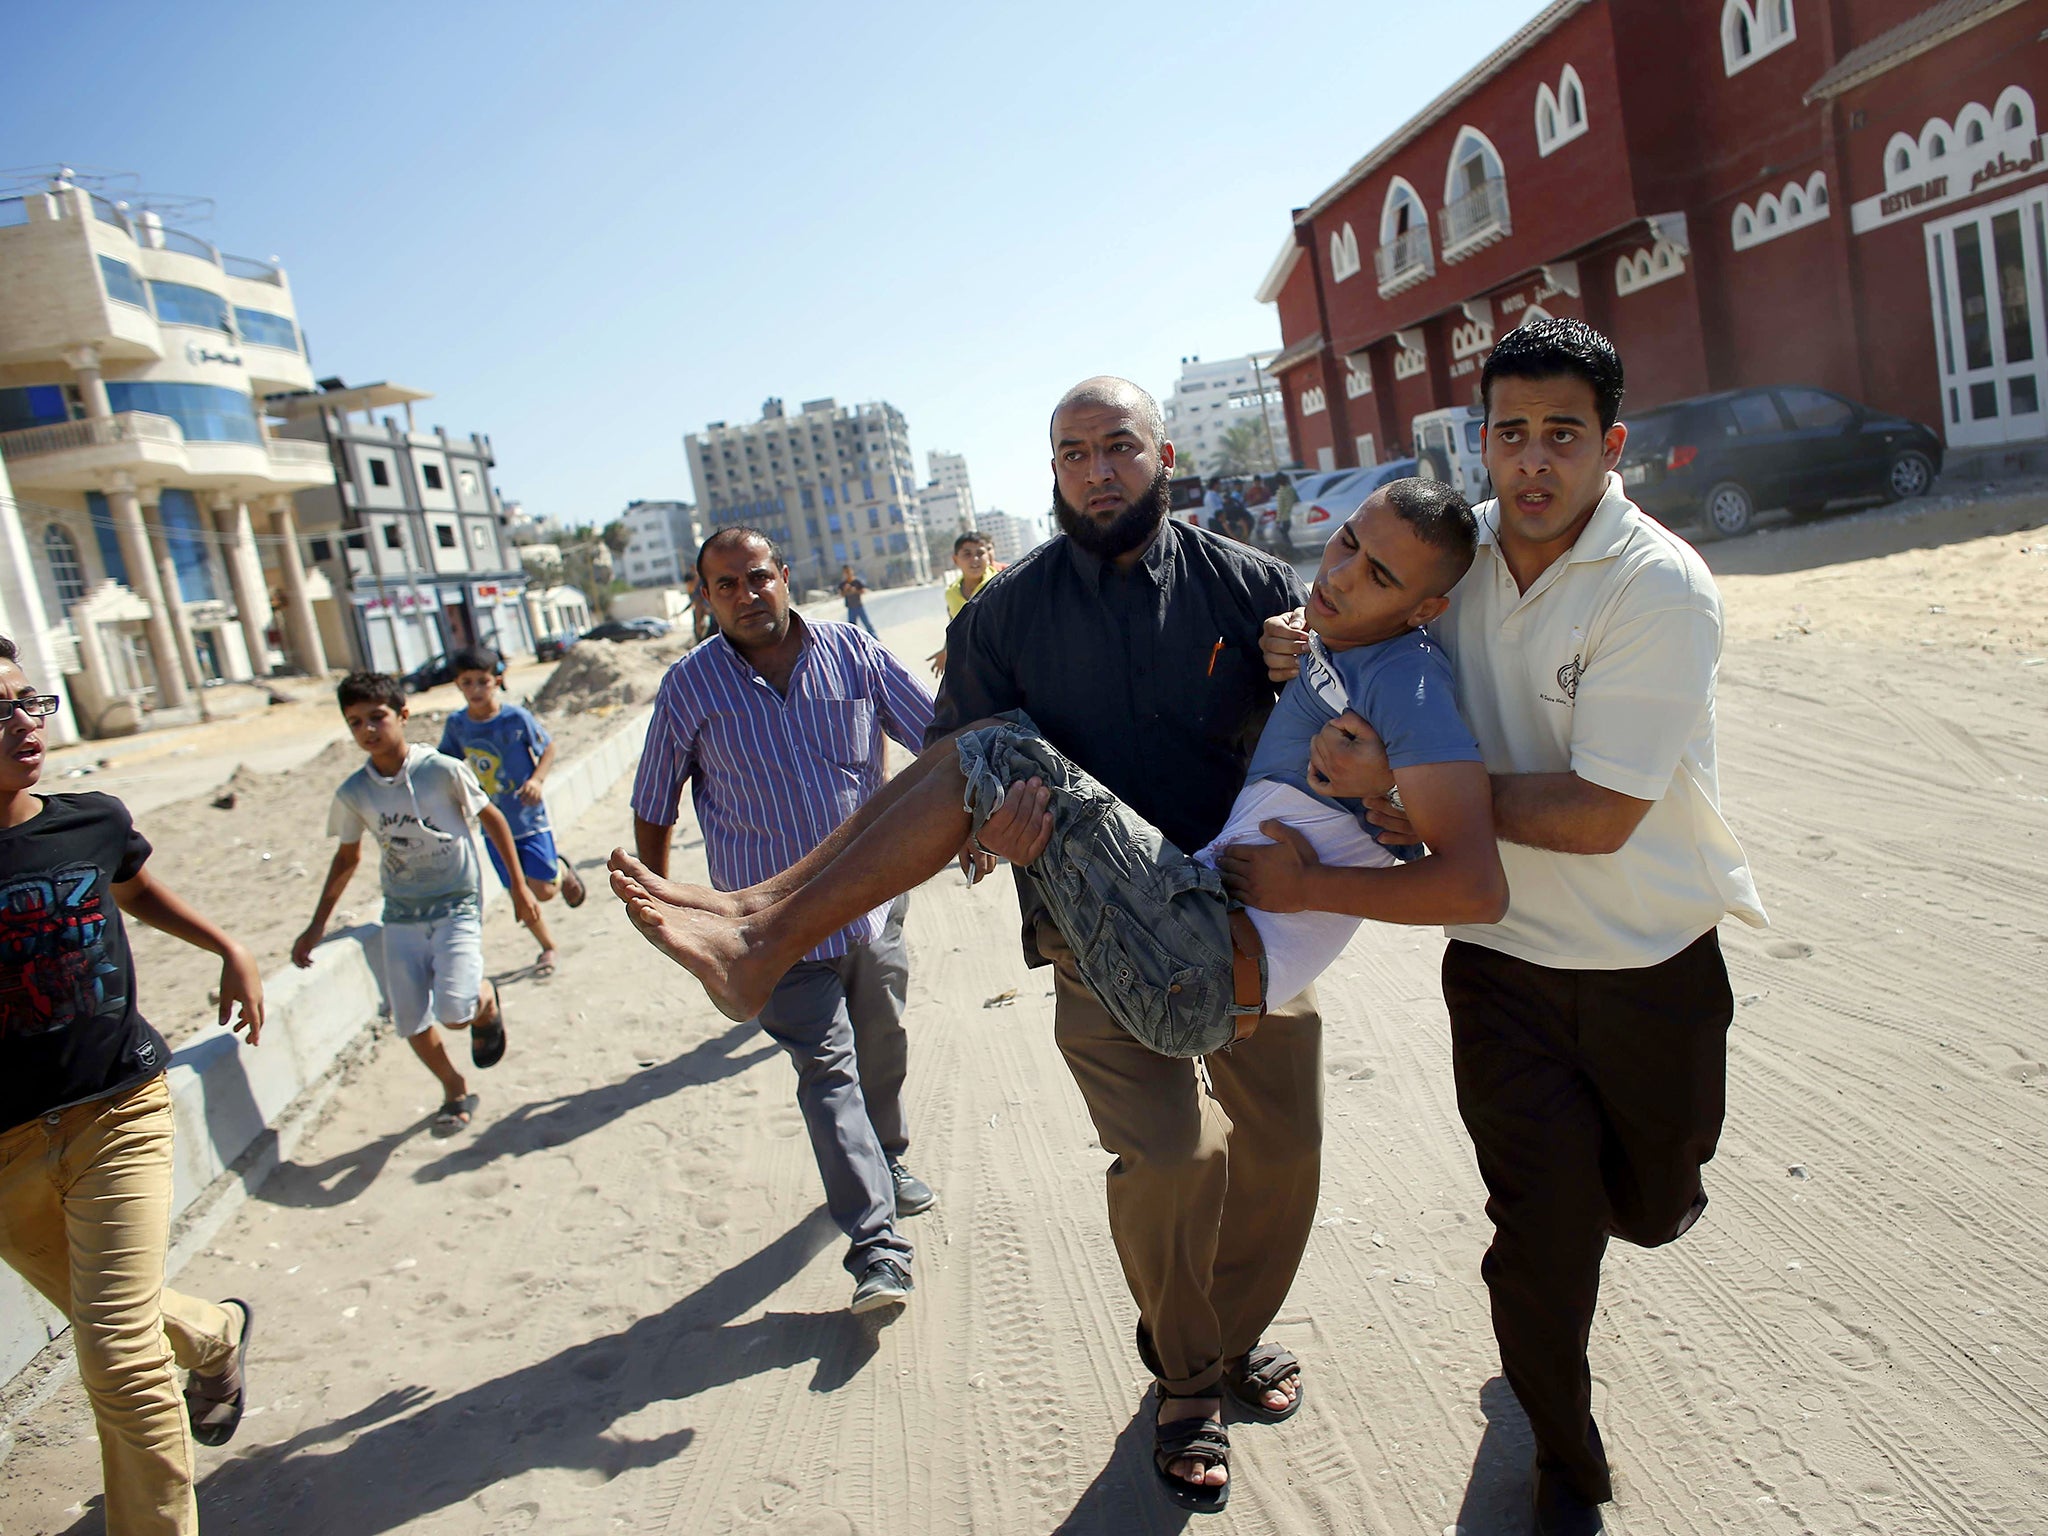 Palestinian employees of Gaza City's al-Deira hotel carry a wounded boy following an Israeli military strike nearby on the beach 